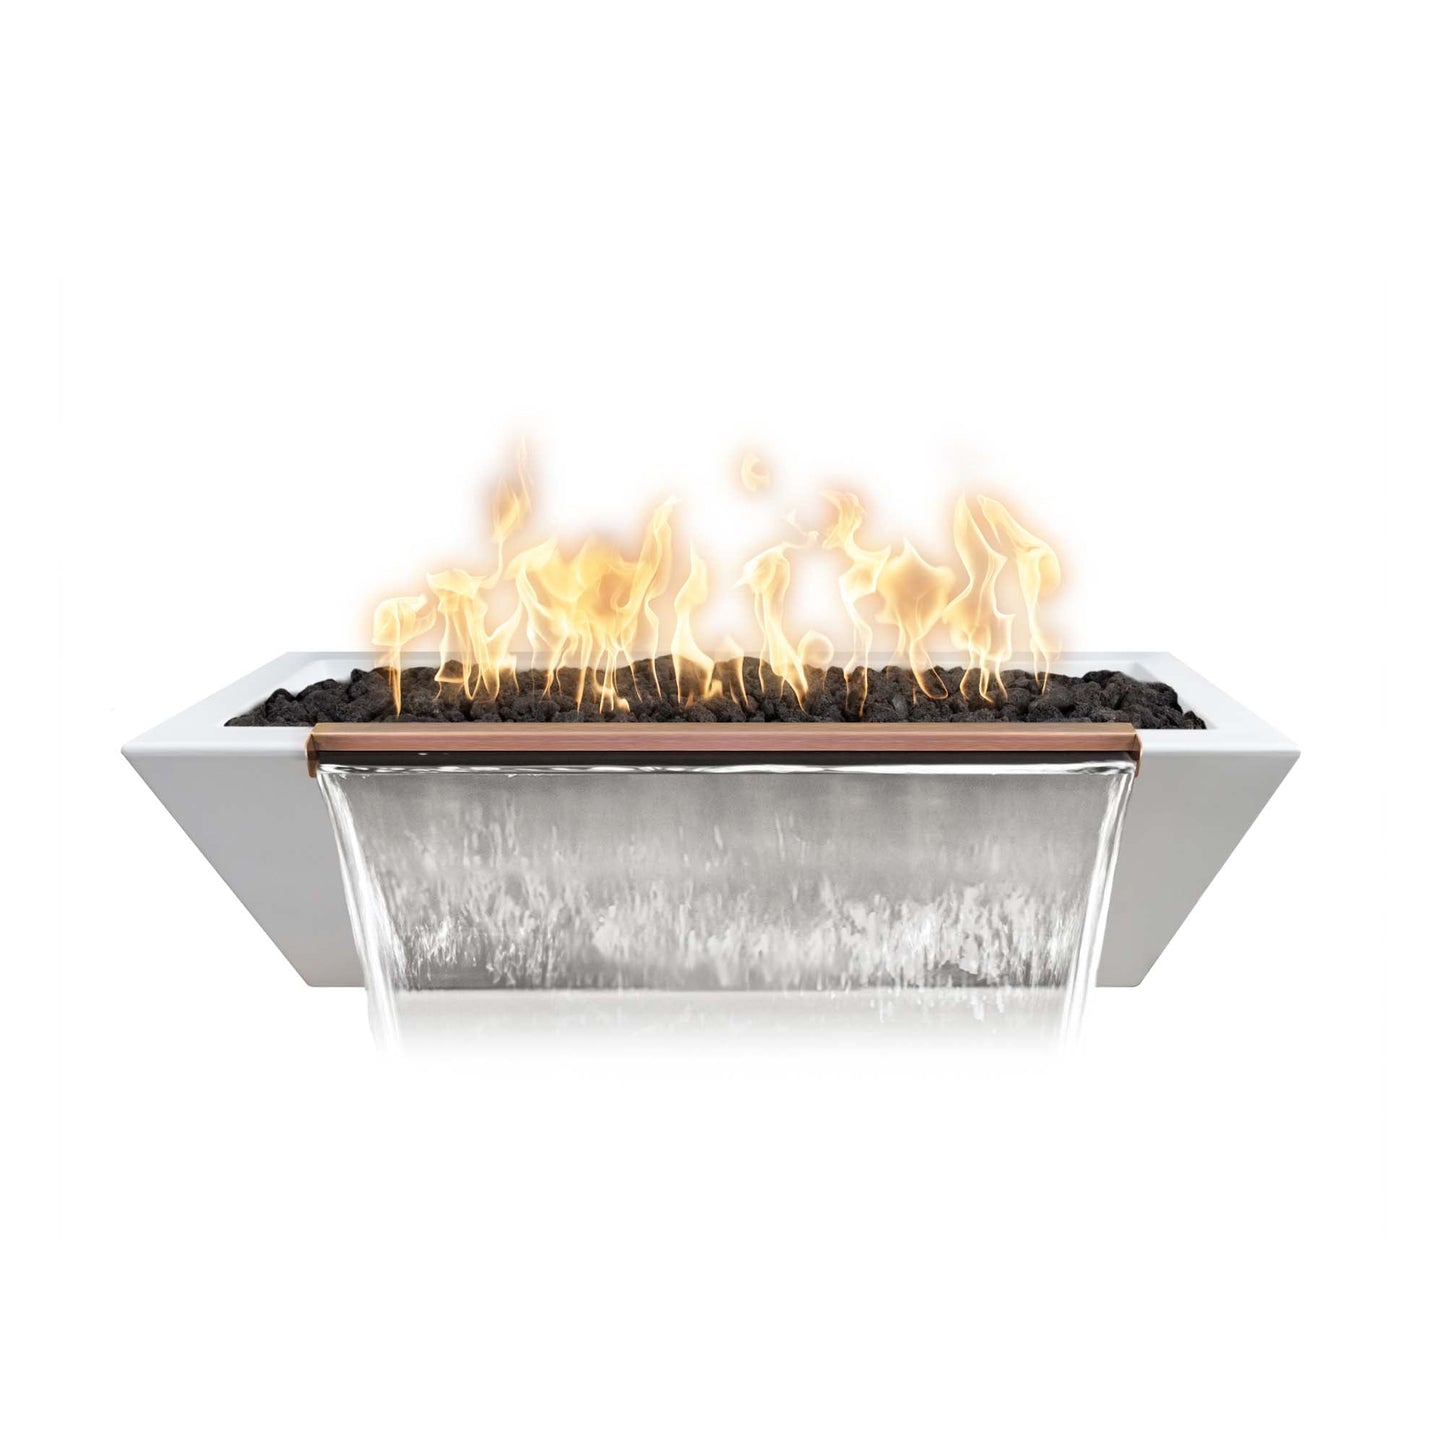 The Outdoor Plus Linear Maya 72" White GFRC Concrete Liquid Propane Fire & Water Bowl with Match Lit Ignition